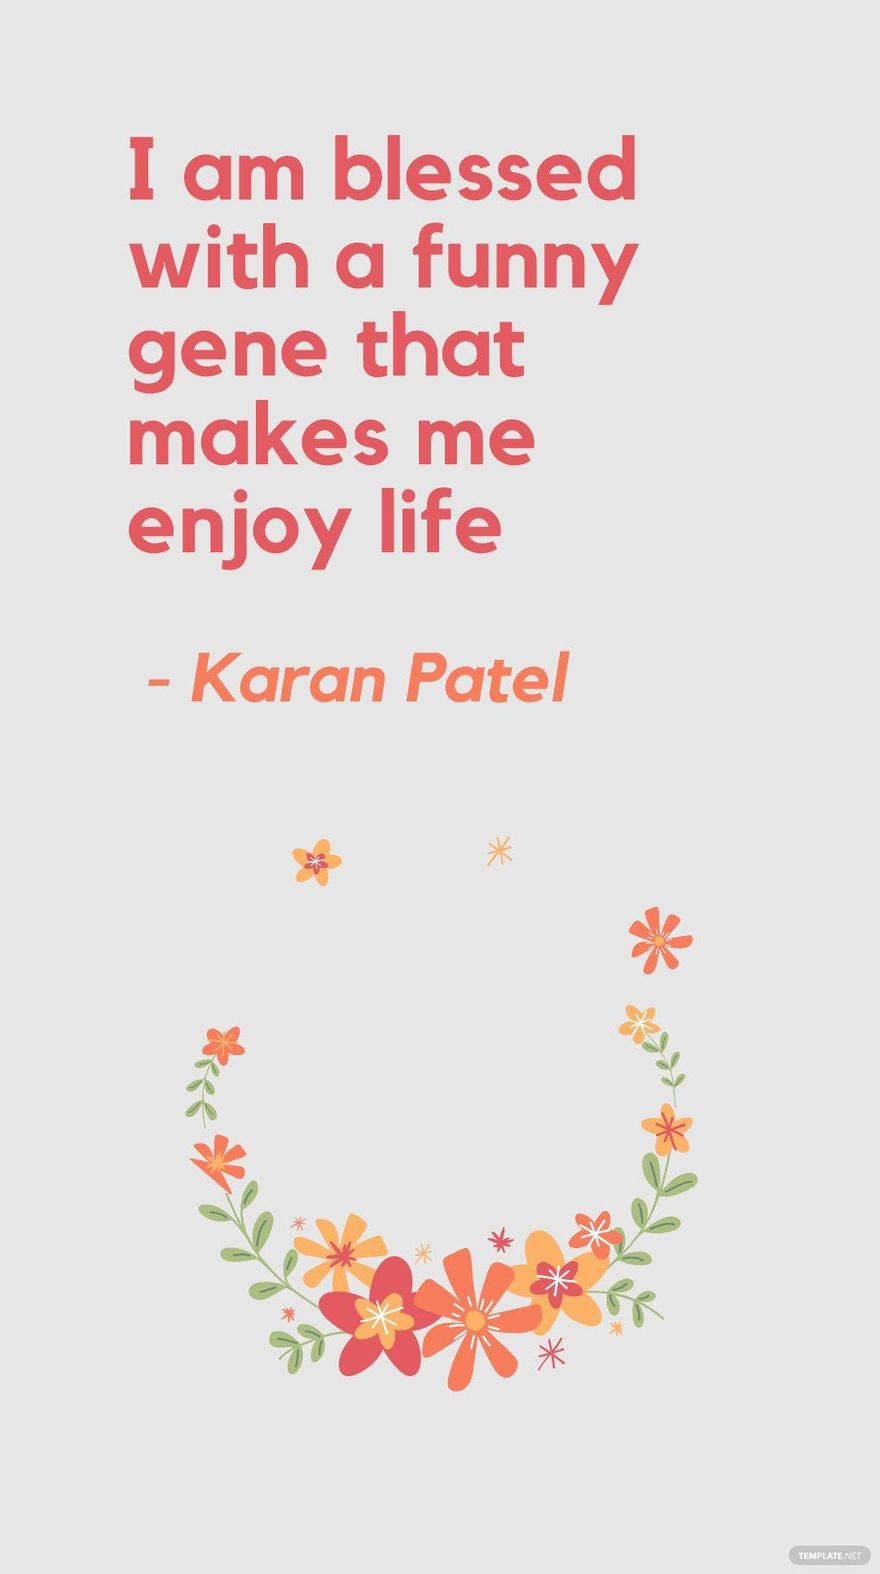 Karan Patel - I am blessed with a funny gene that makes me enjoy life